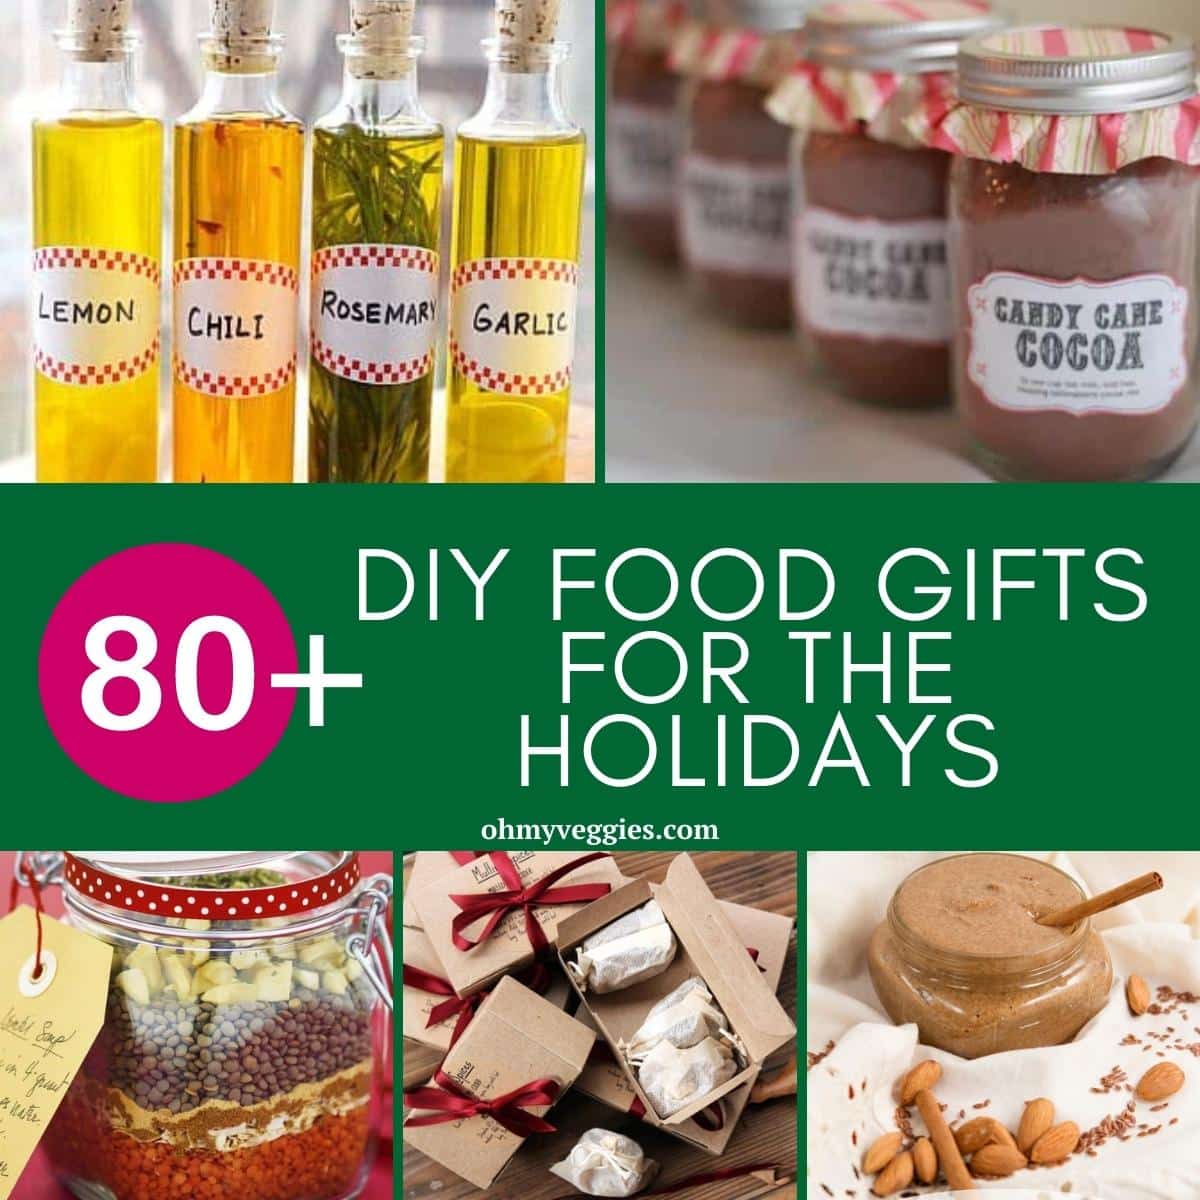 DIY Food Gifts for the Holidays